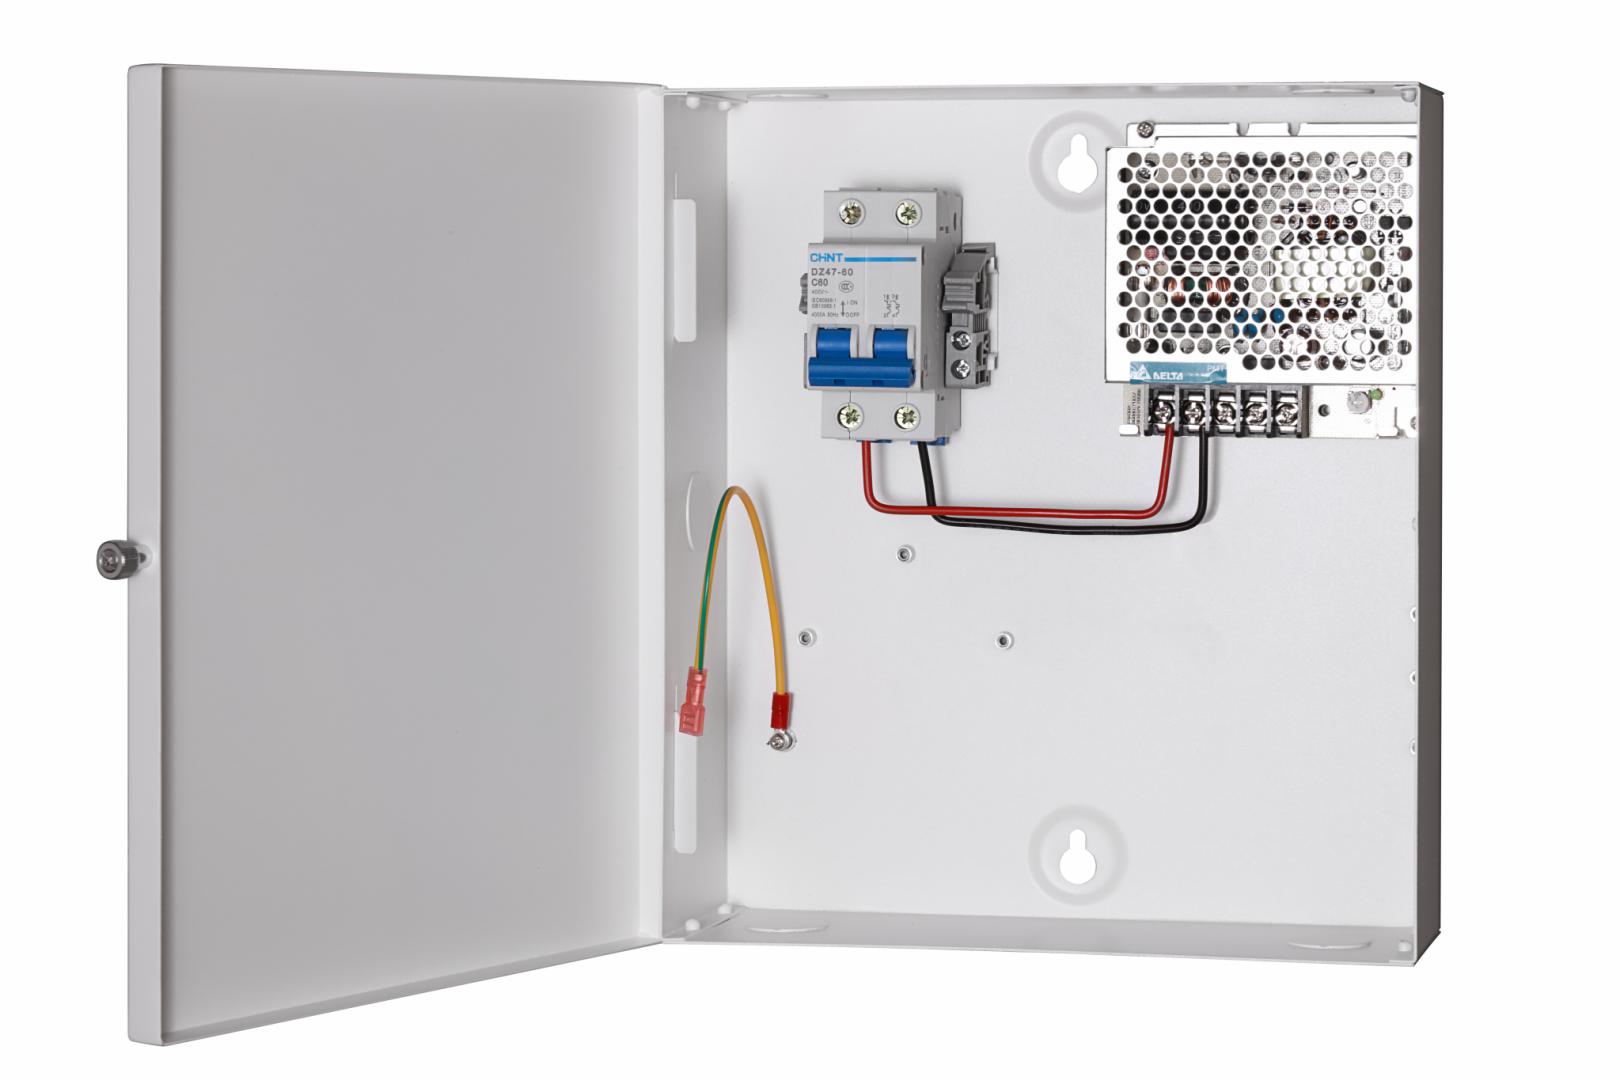 Power supply Hikvision DS-KAW50-1 for Door station and VillaDoorStation ,Output: 12 VDC, 4.2A